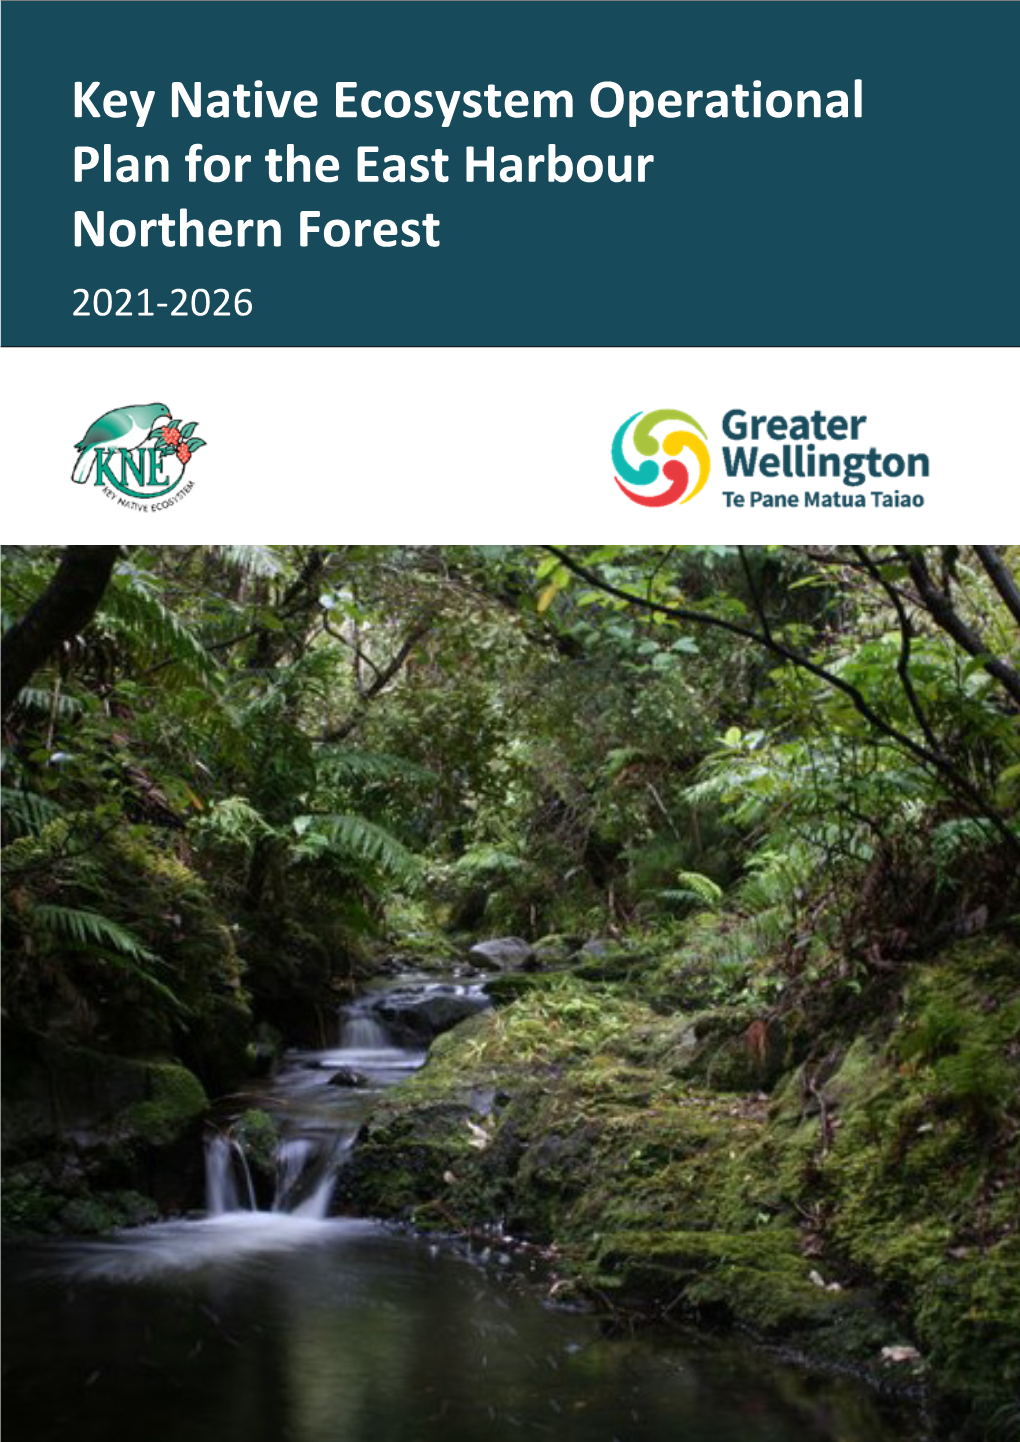 Key Native Ecosystem Operational Plan for East Harbour Northern Forest